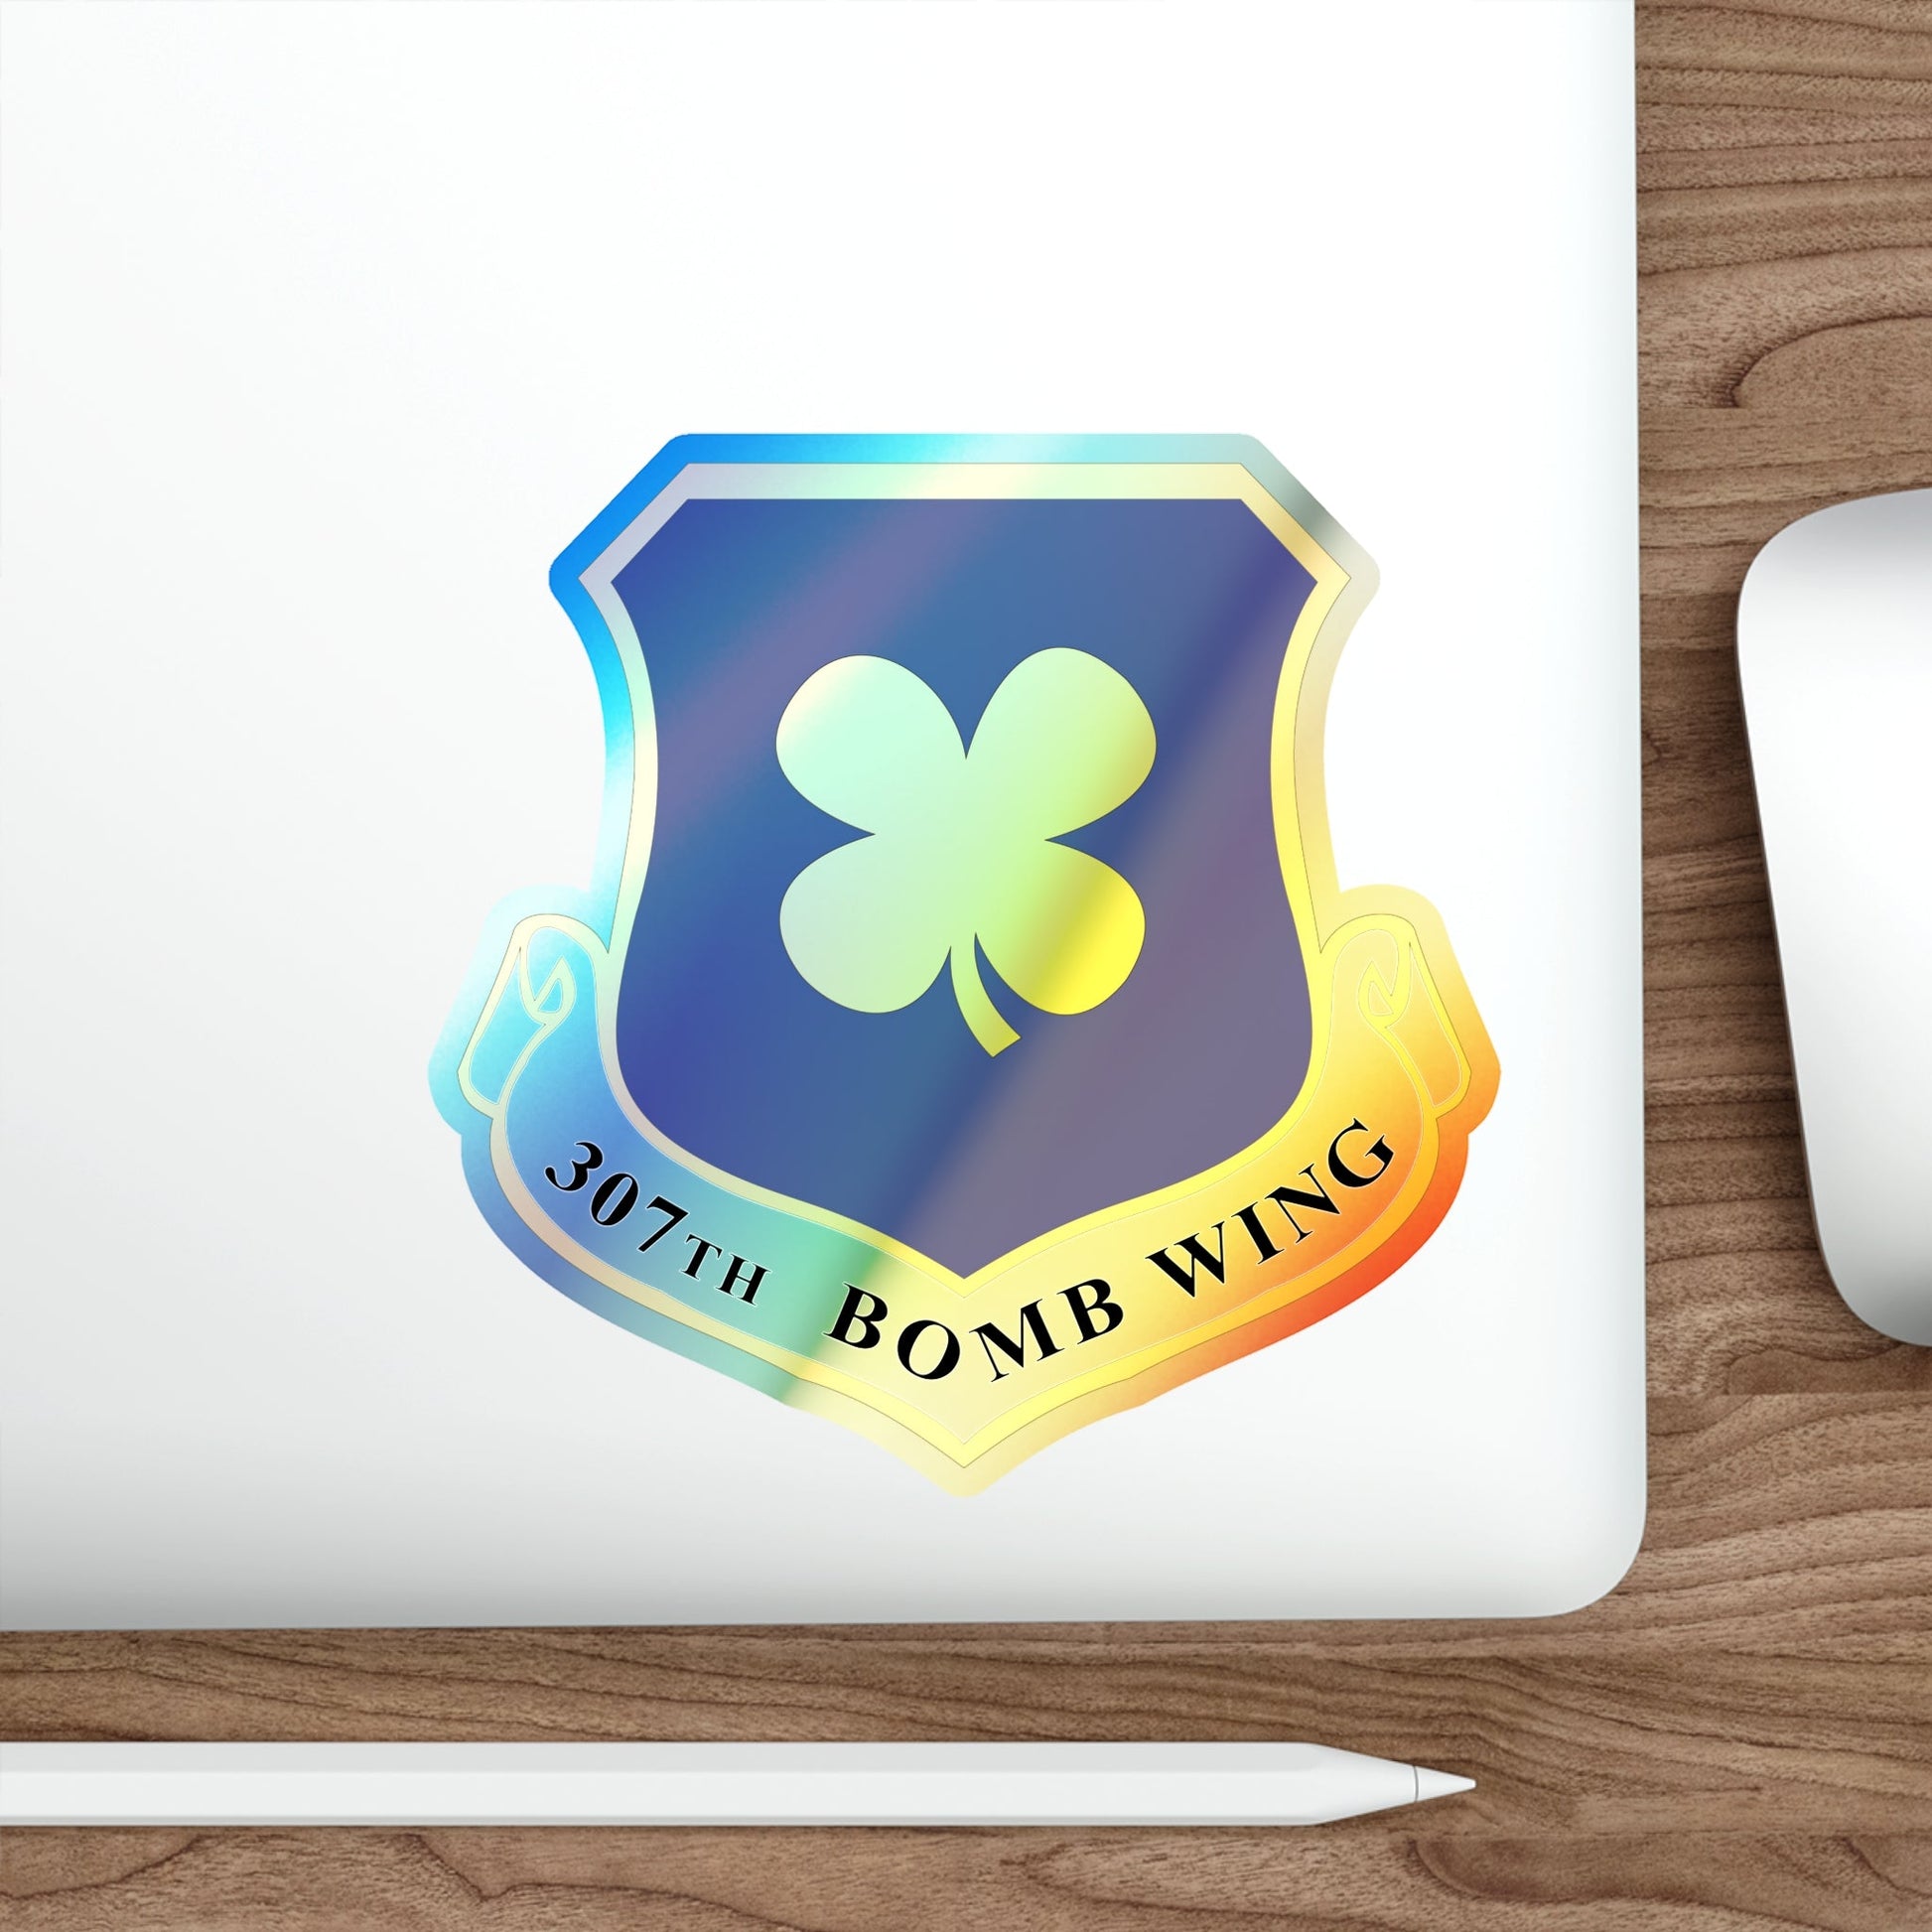 307th Bomb Wing (U.S. Air Force) Holographic STICKER Die-Cut Vinyl Decal-The Sticker Space